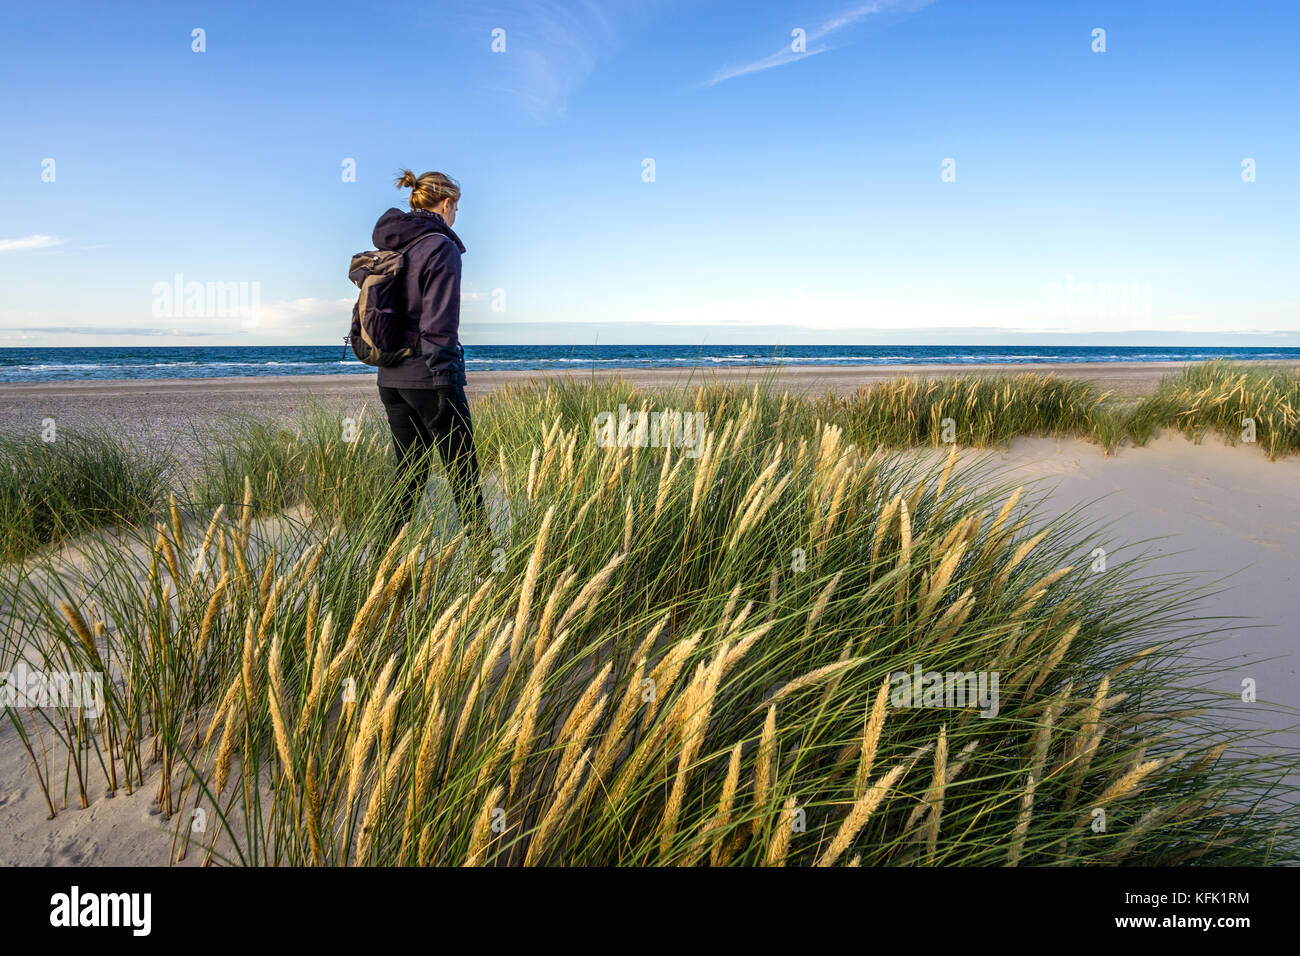 Young woman hiking in coastal dune grass at beach of North Sea. Stock Photo